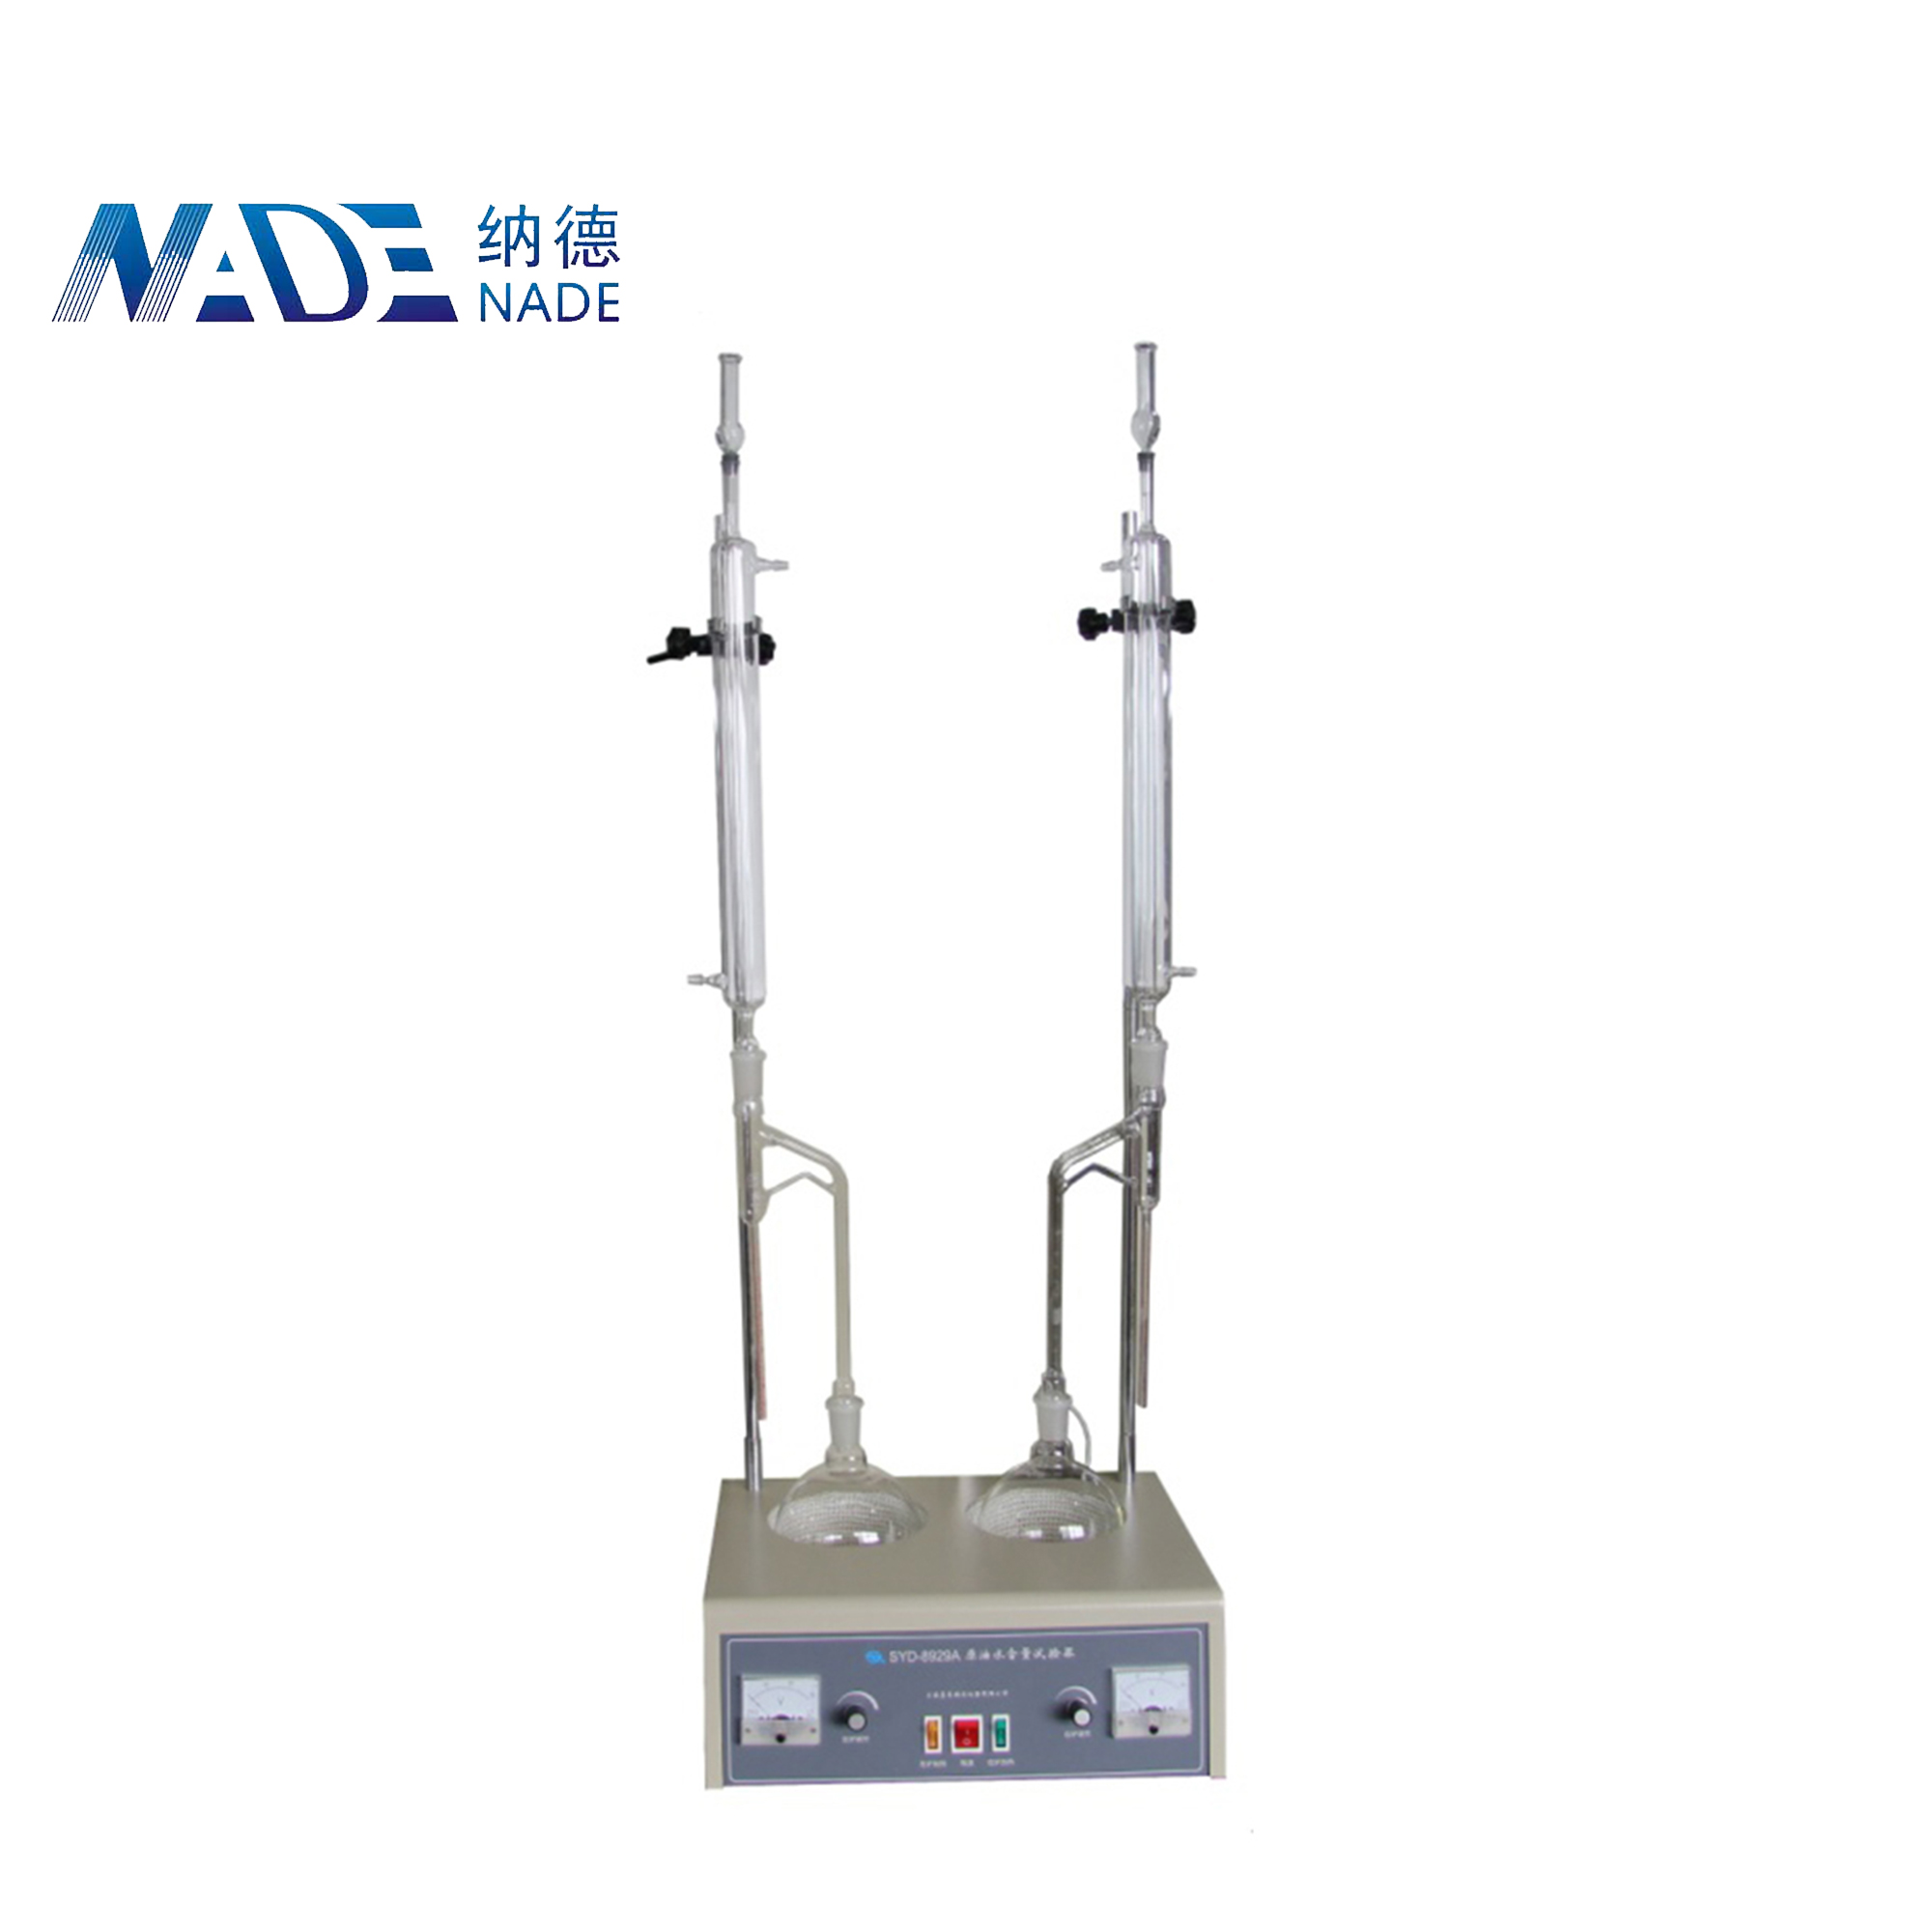 NADE Crude Oil Lab Water Content Tester Desktop structure and double units SYD-8929A